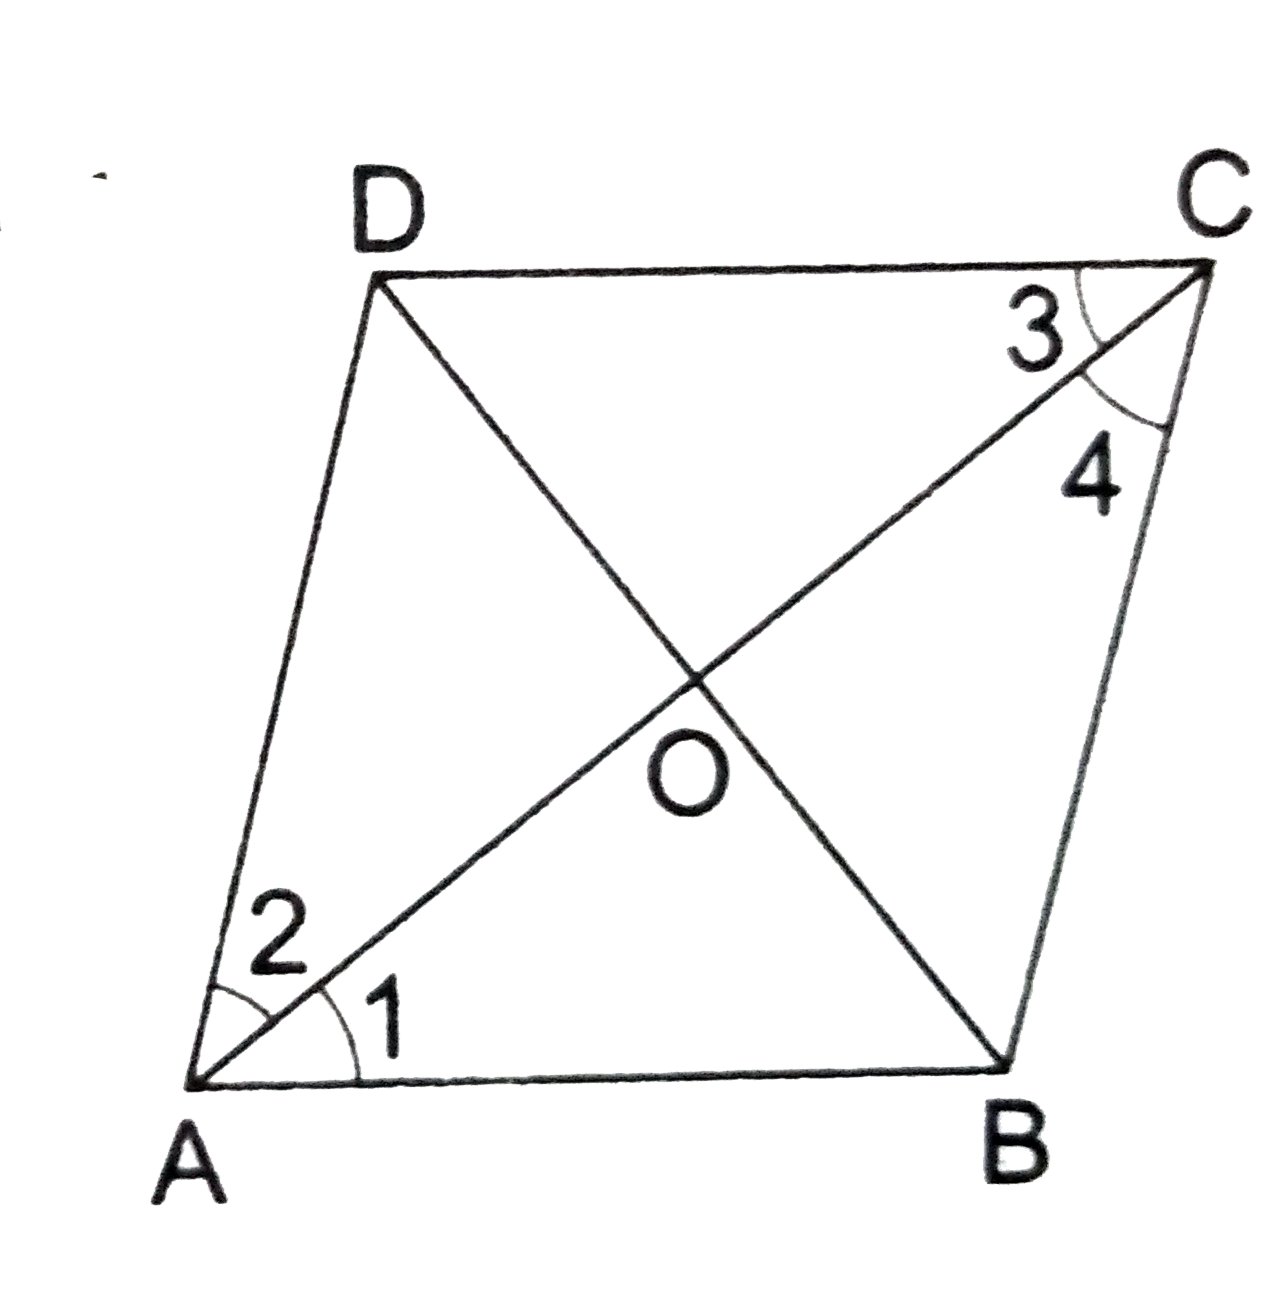 If a diagonal of a parallelogram bisects one of the angles of the parallelogram, prove that it also bisects the angle opposite it, and that the two diagonals are perpendicular to each other.   Also, prove that it is a rhombus.